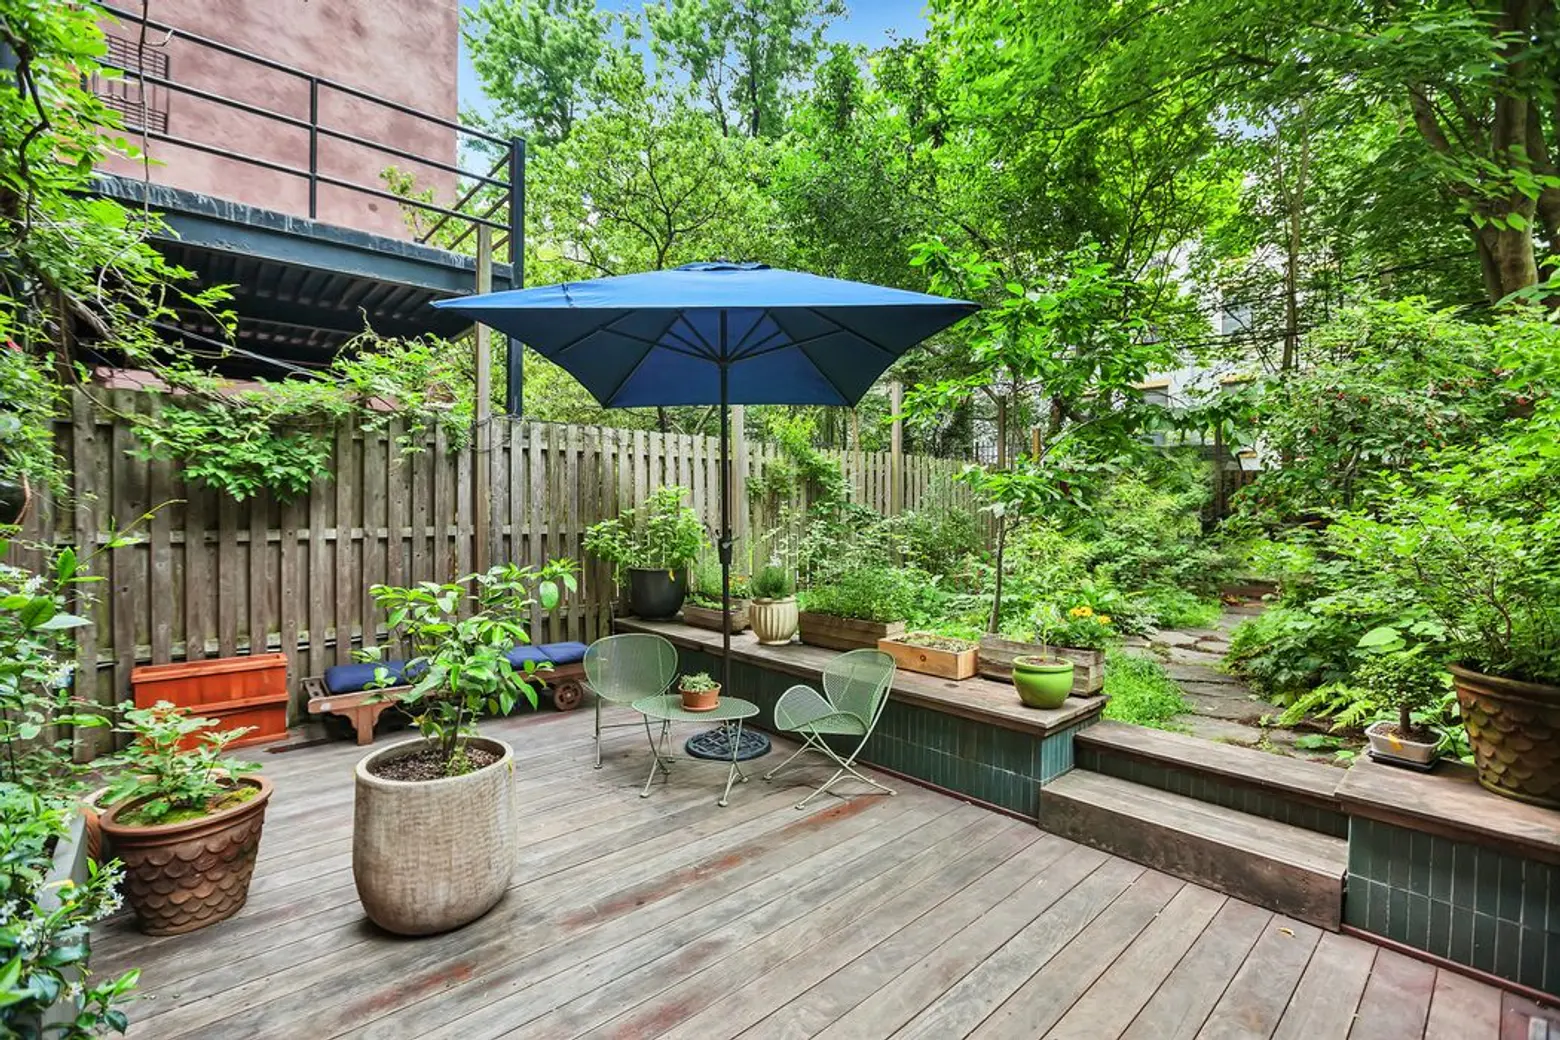 Maggie Gyllenhaal and Peter Sarsgaard, 36 Sterling Place, Park Slope townhouse,